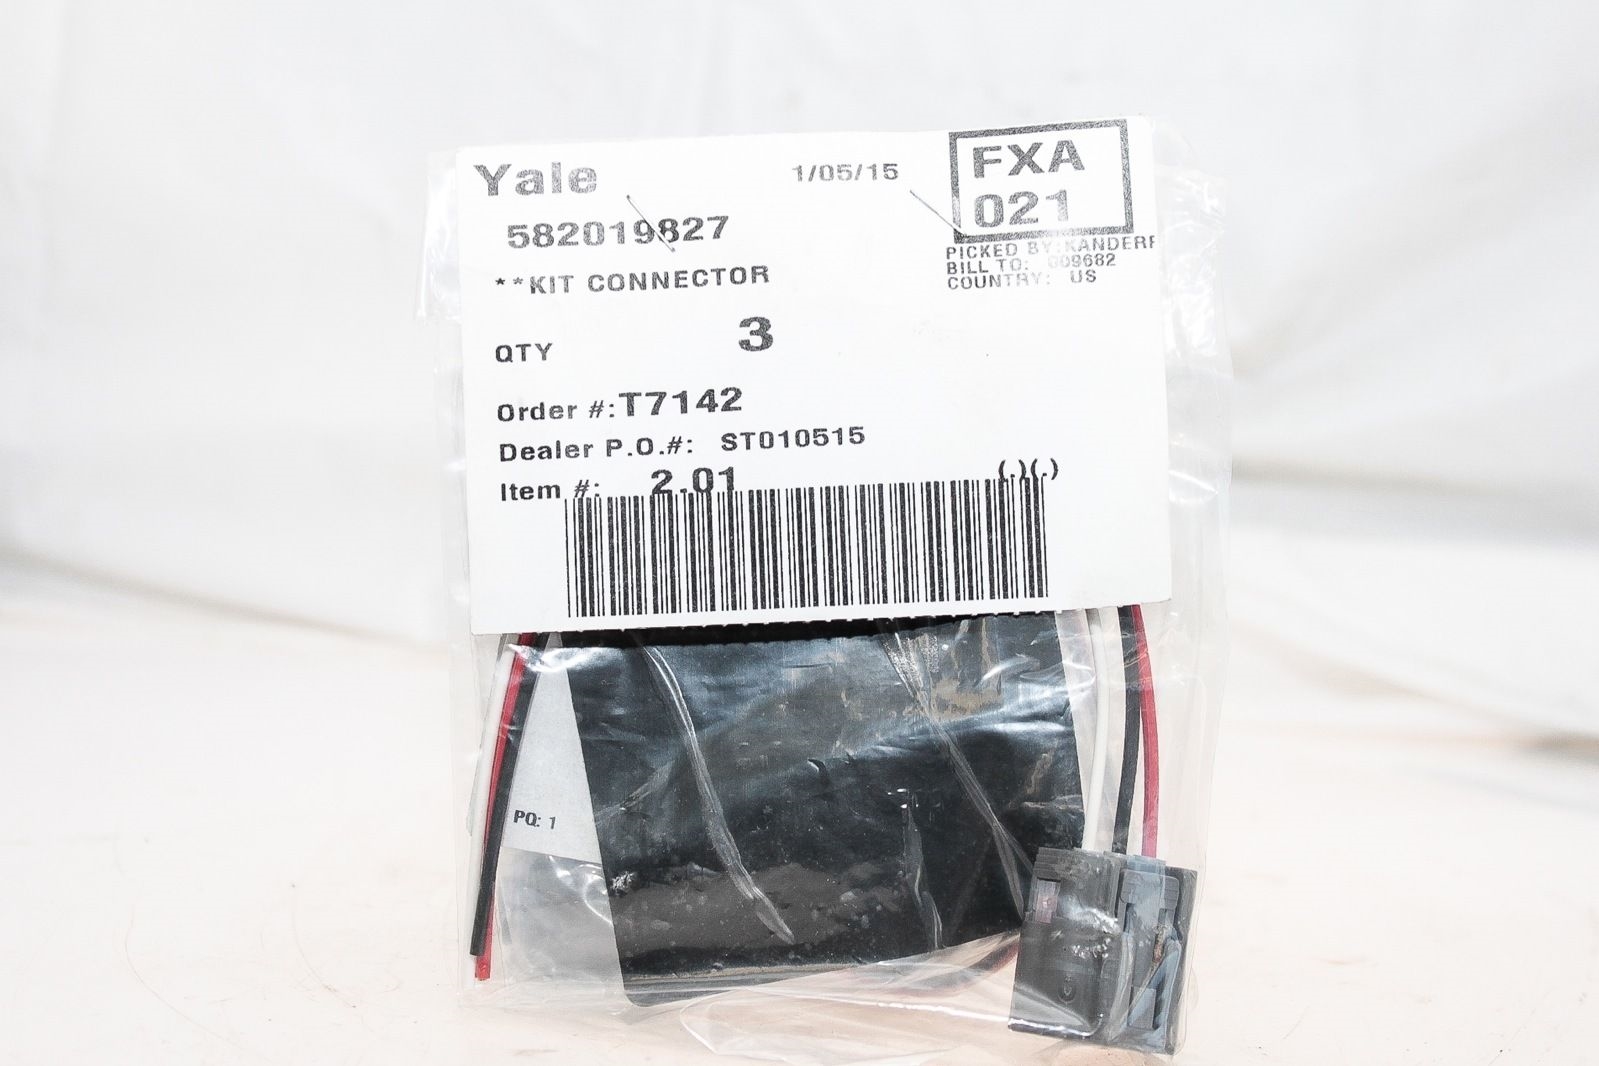 YALE 582019827 FORKLIFT CONNECTOR KIT! NEW IN LOT OF 3! FAST SHIPPING! (F57) 1